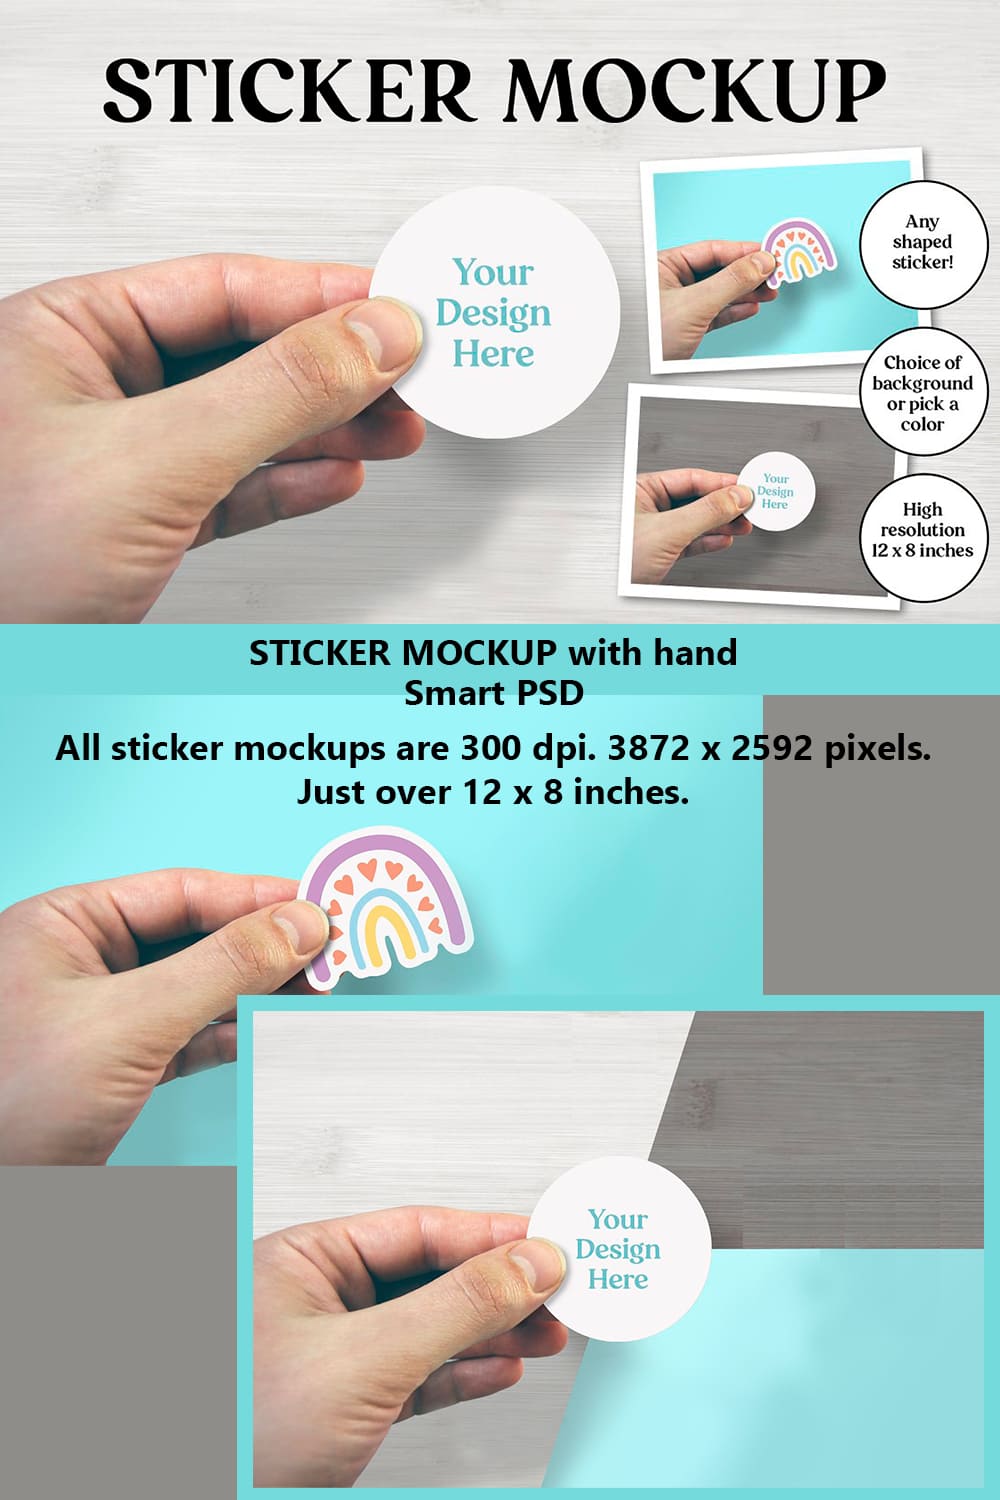 Collection of images of wonderful stickers in the form of a hand.